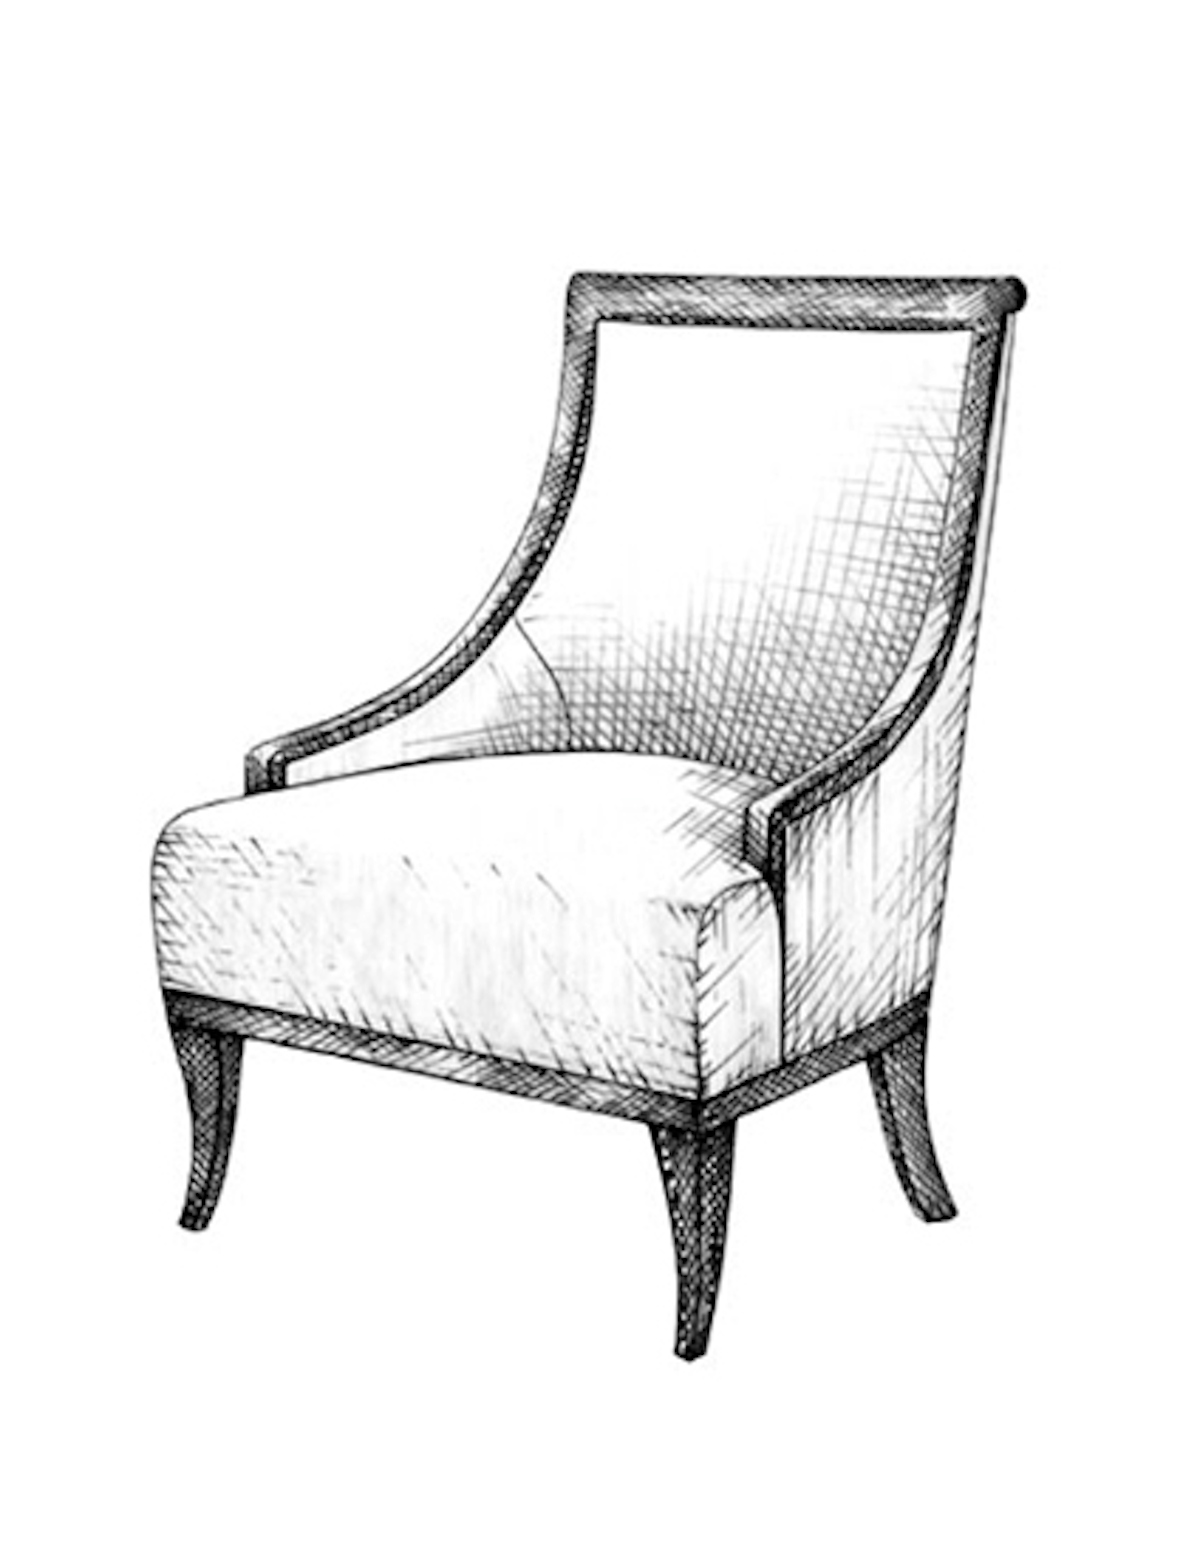 The Best of Chair Design - Top 10 Chair Styles - Directoire-style armchair